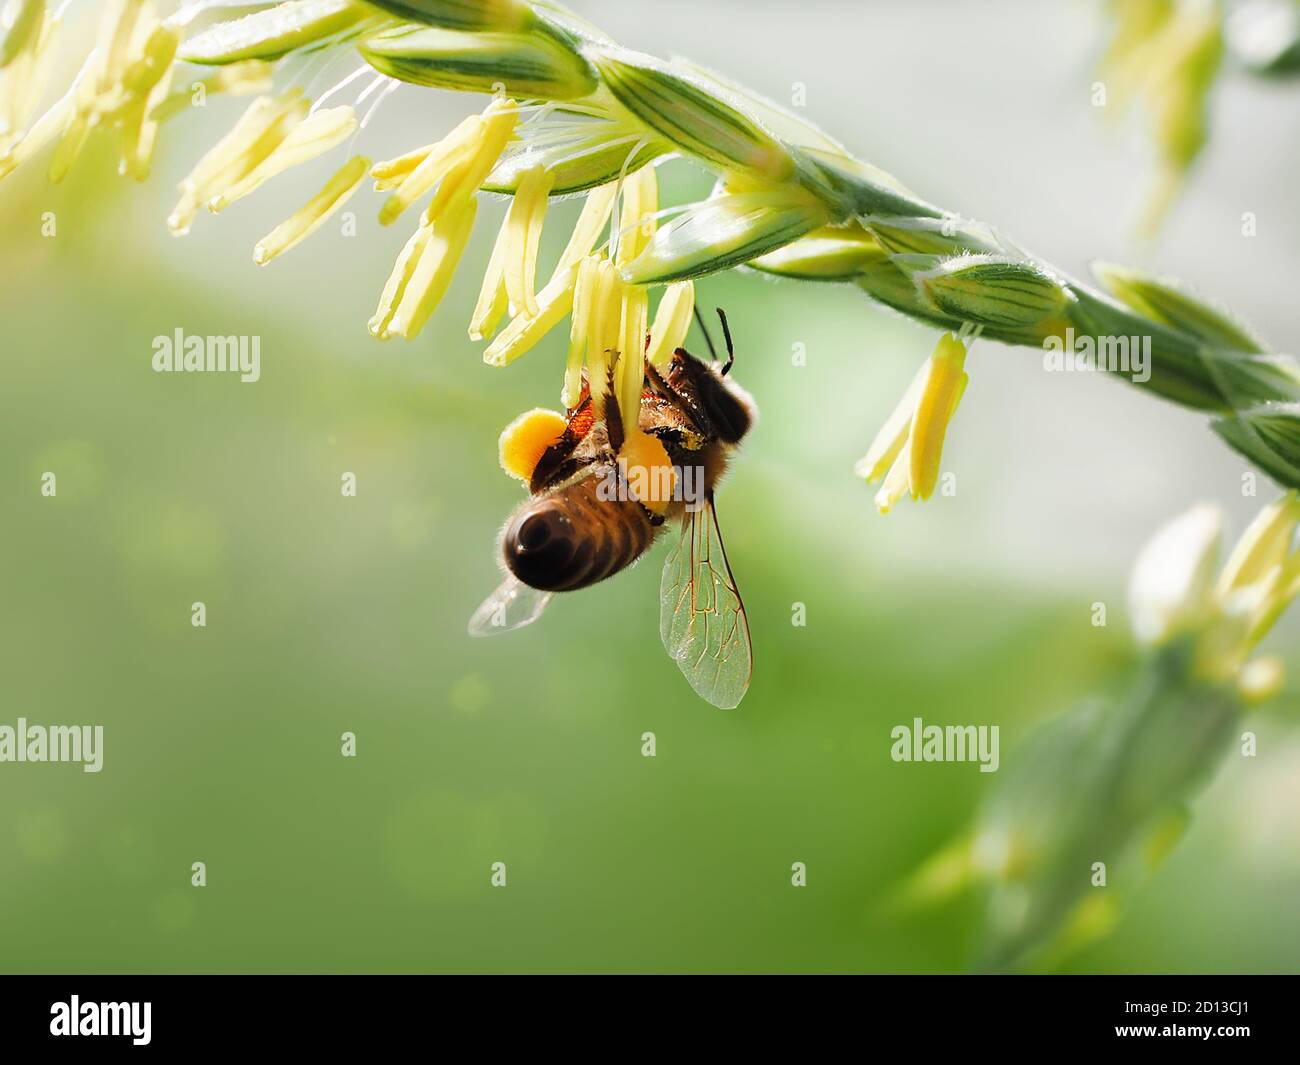 A bee collects pollen from flowering corn. Macro shhot on a blurred background. Stock Photo